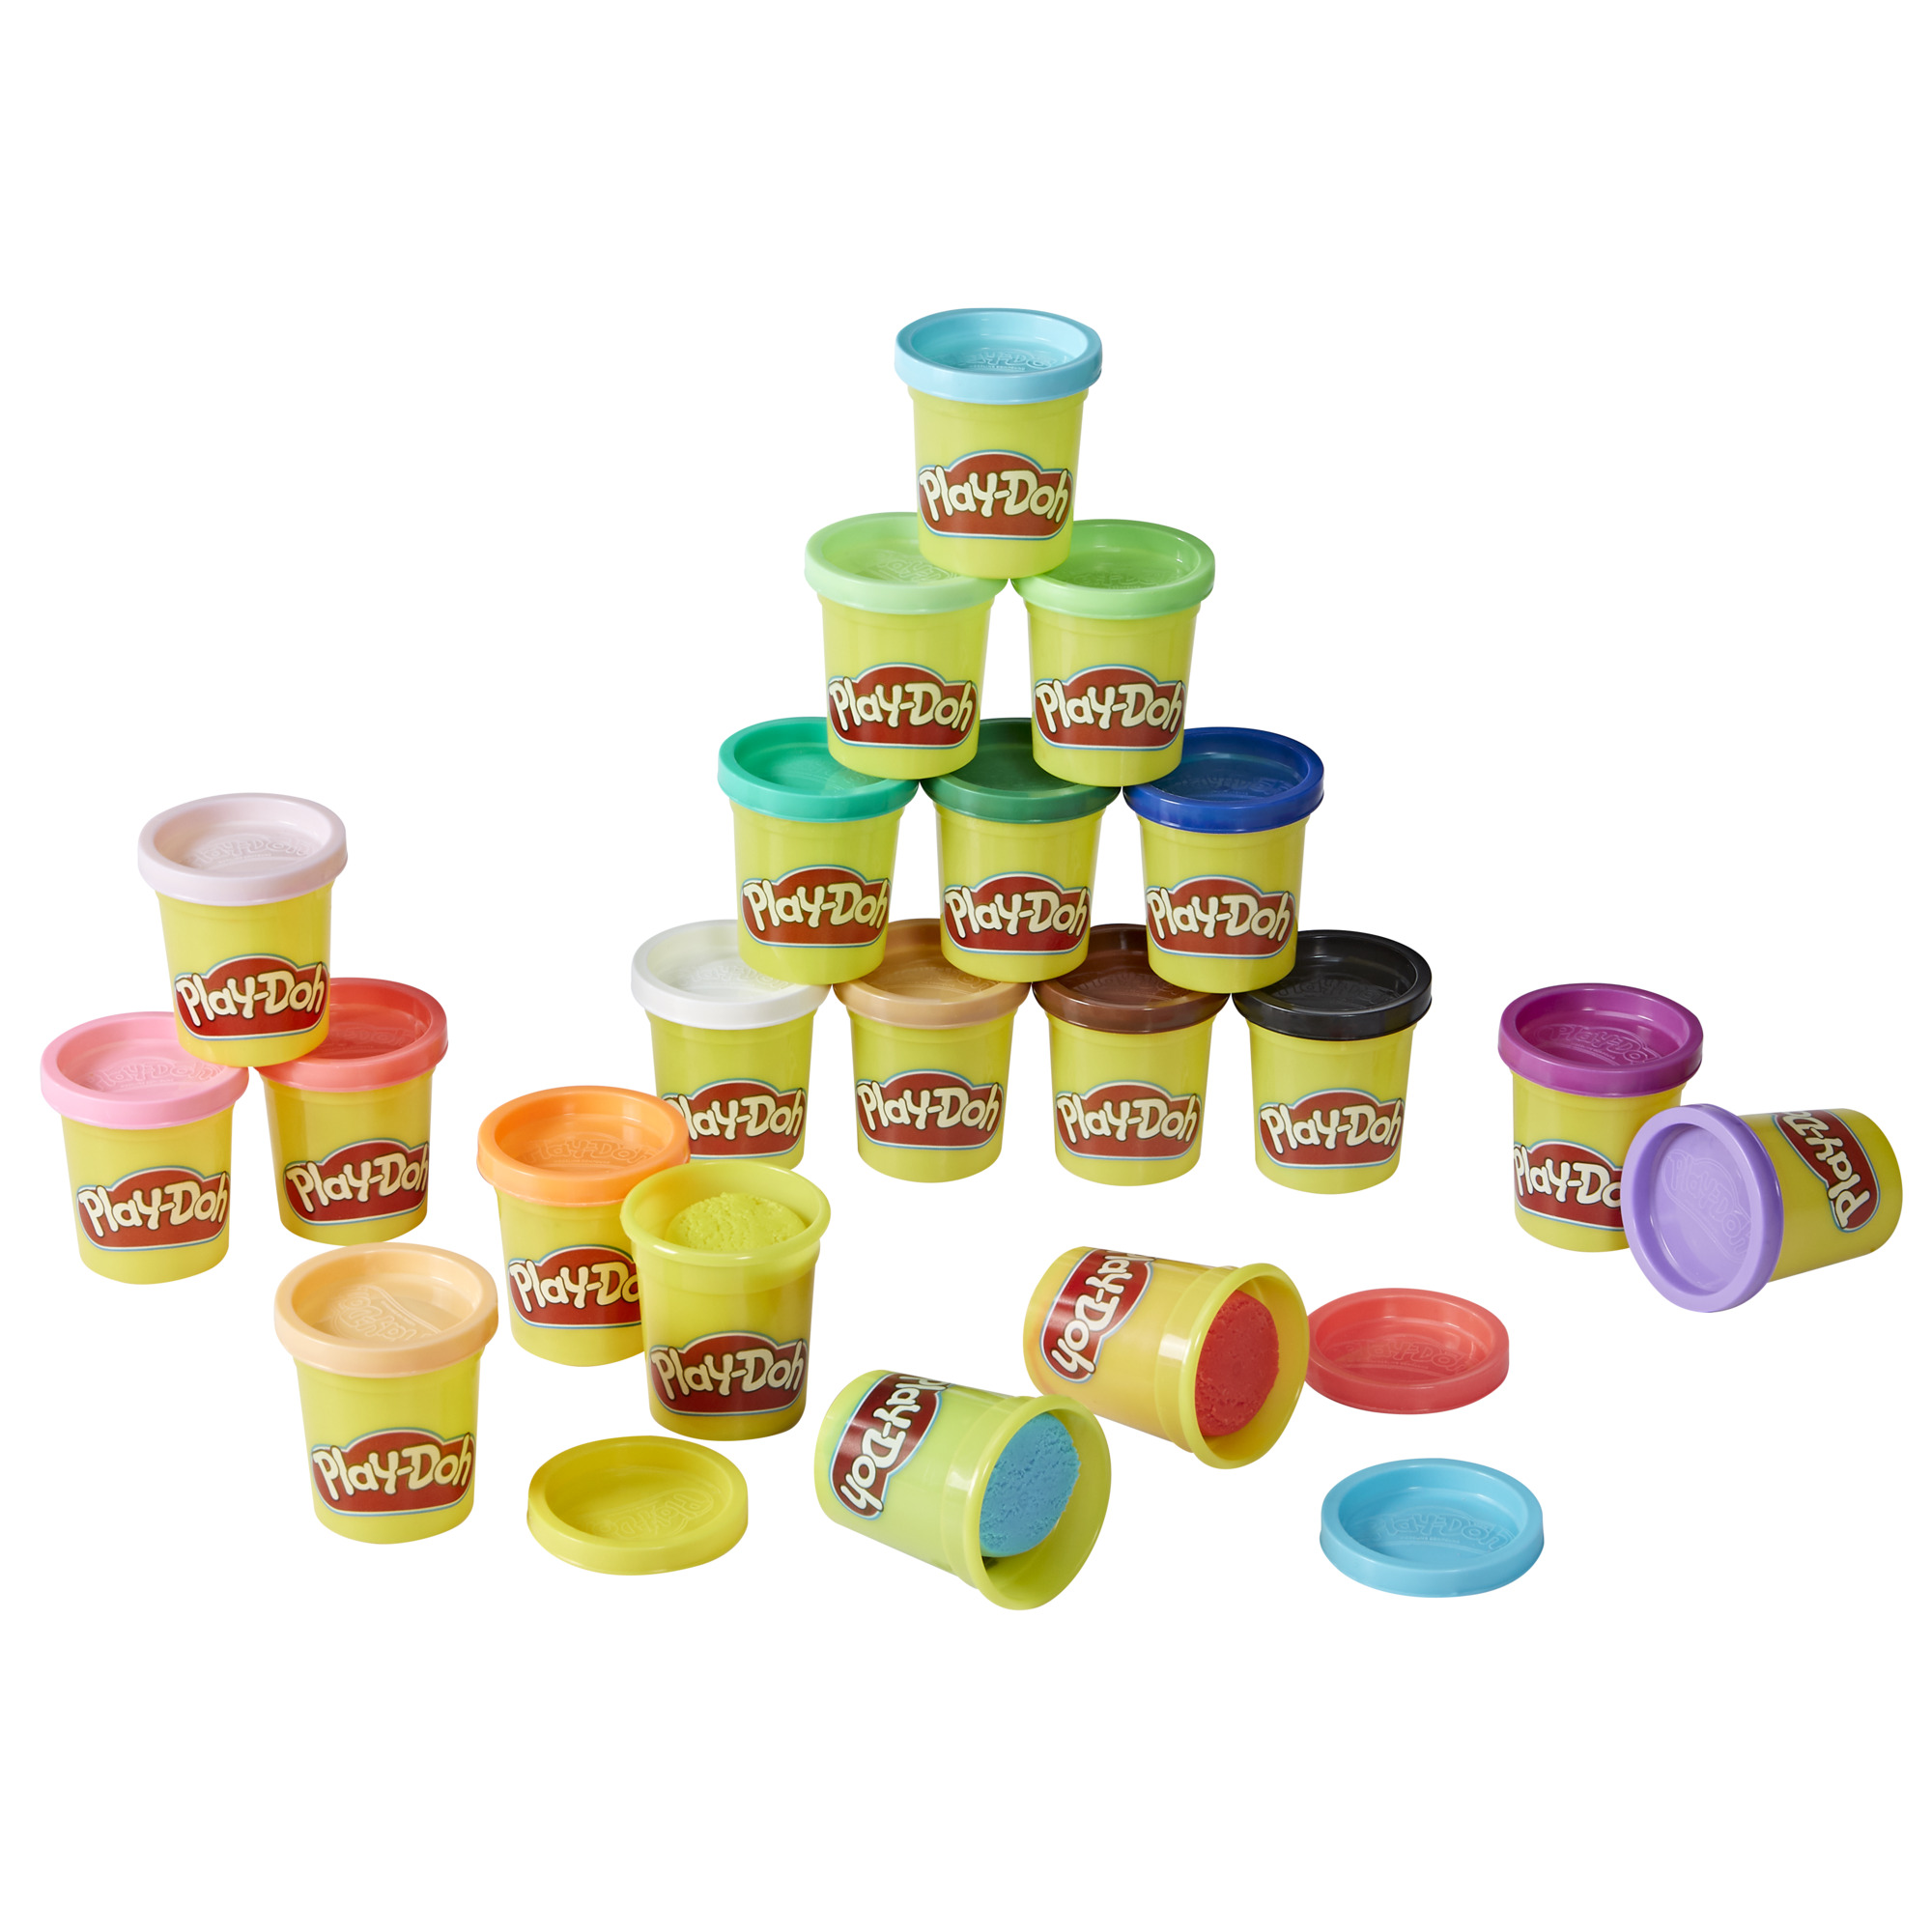 Play-Doh Multicolor Magic Play Dough Set - 20 Color (20 Piece), Only At Walmart - image 1 of 5